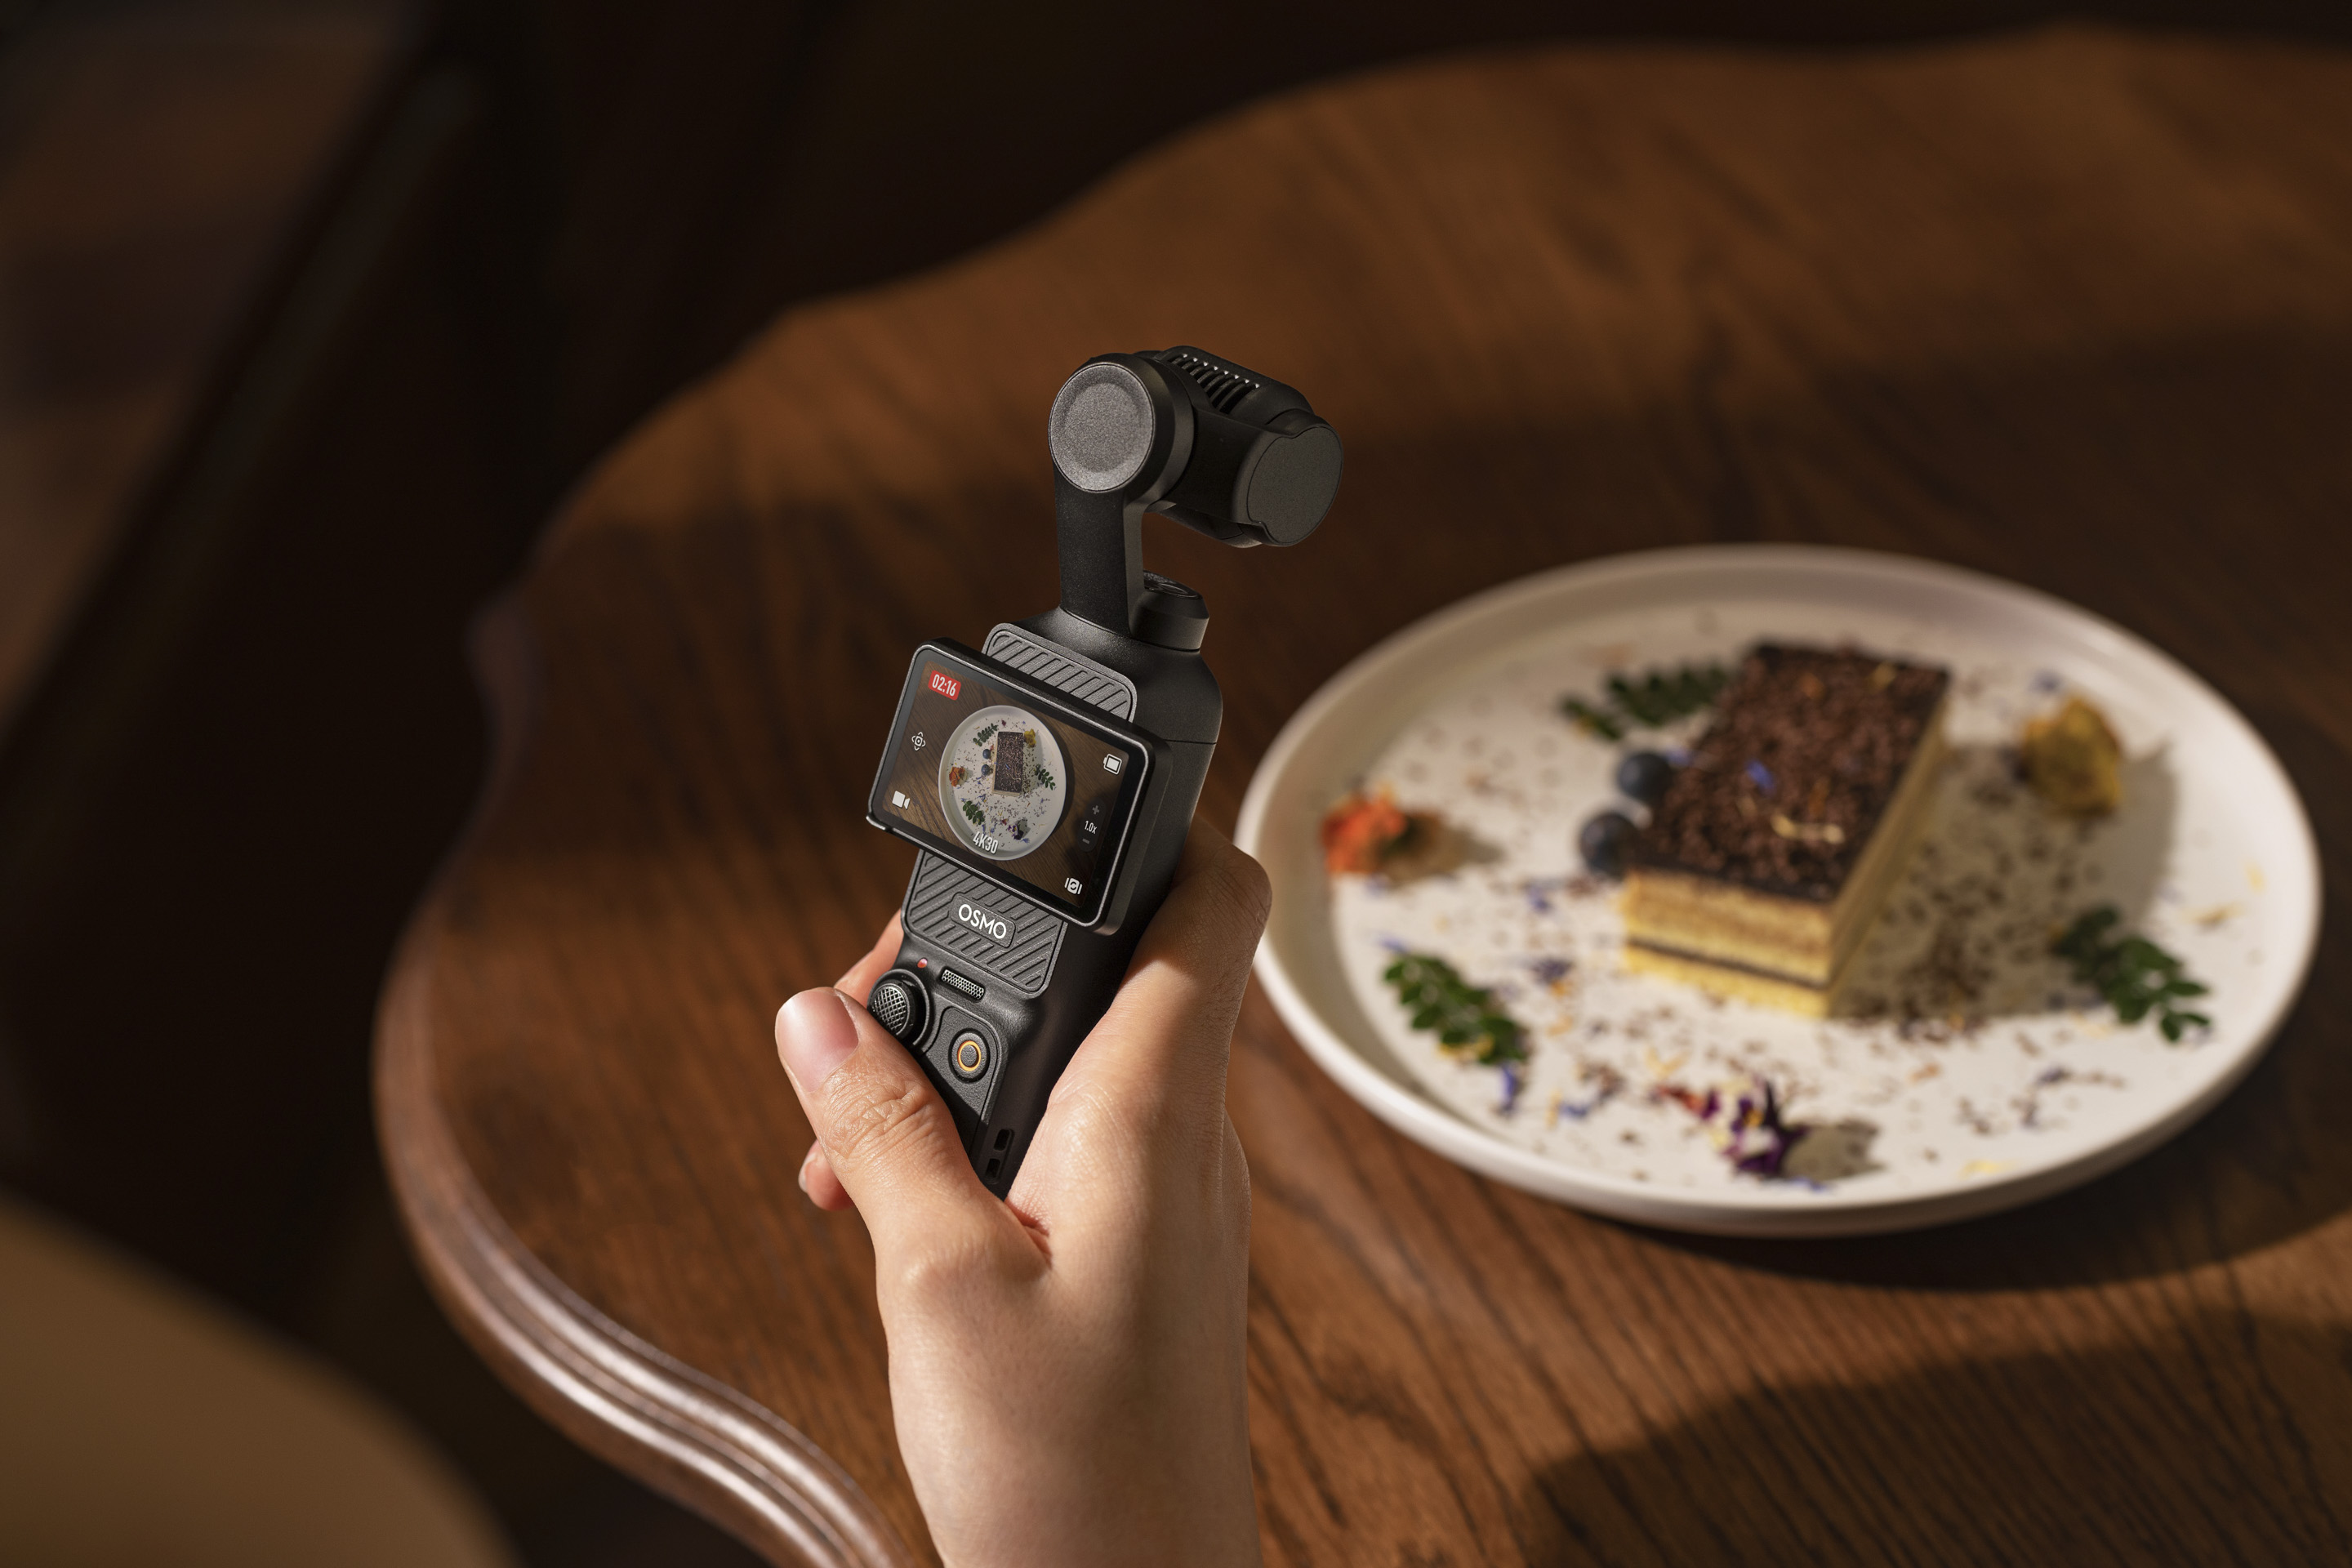 DJI Pocket 3 in the hand shooting food video content with screen in landscape format